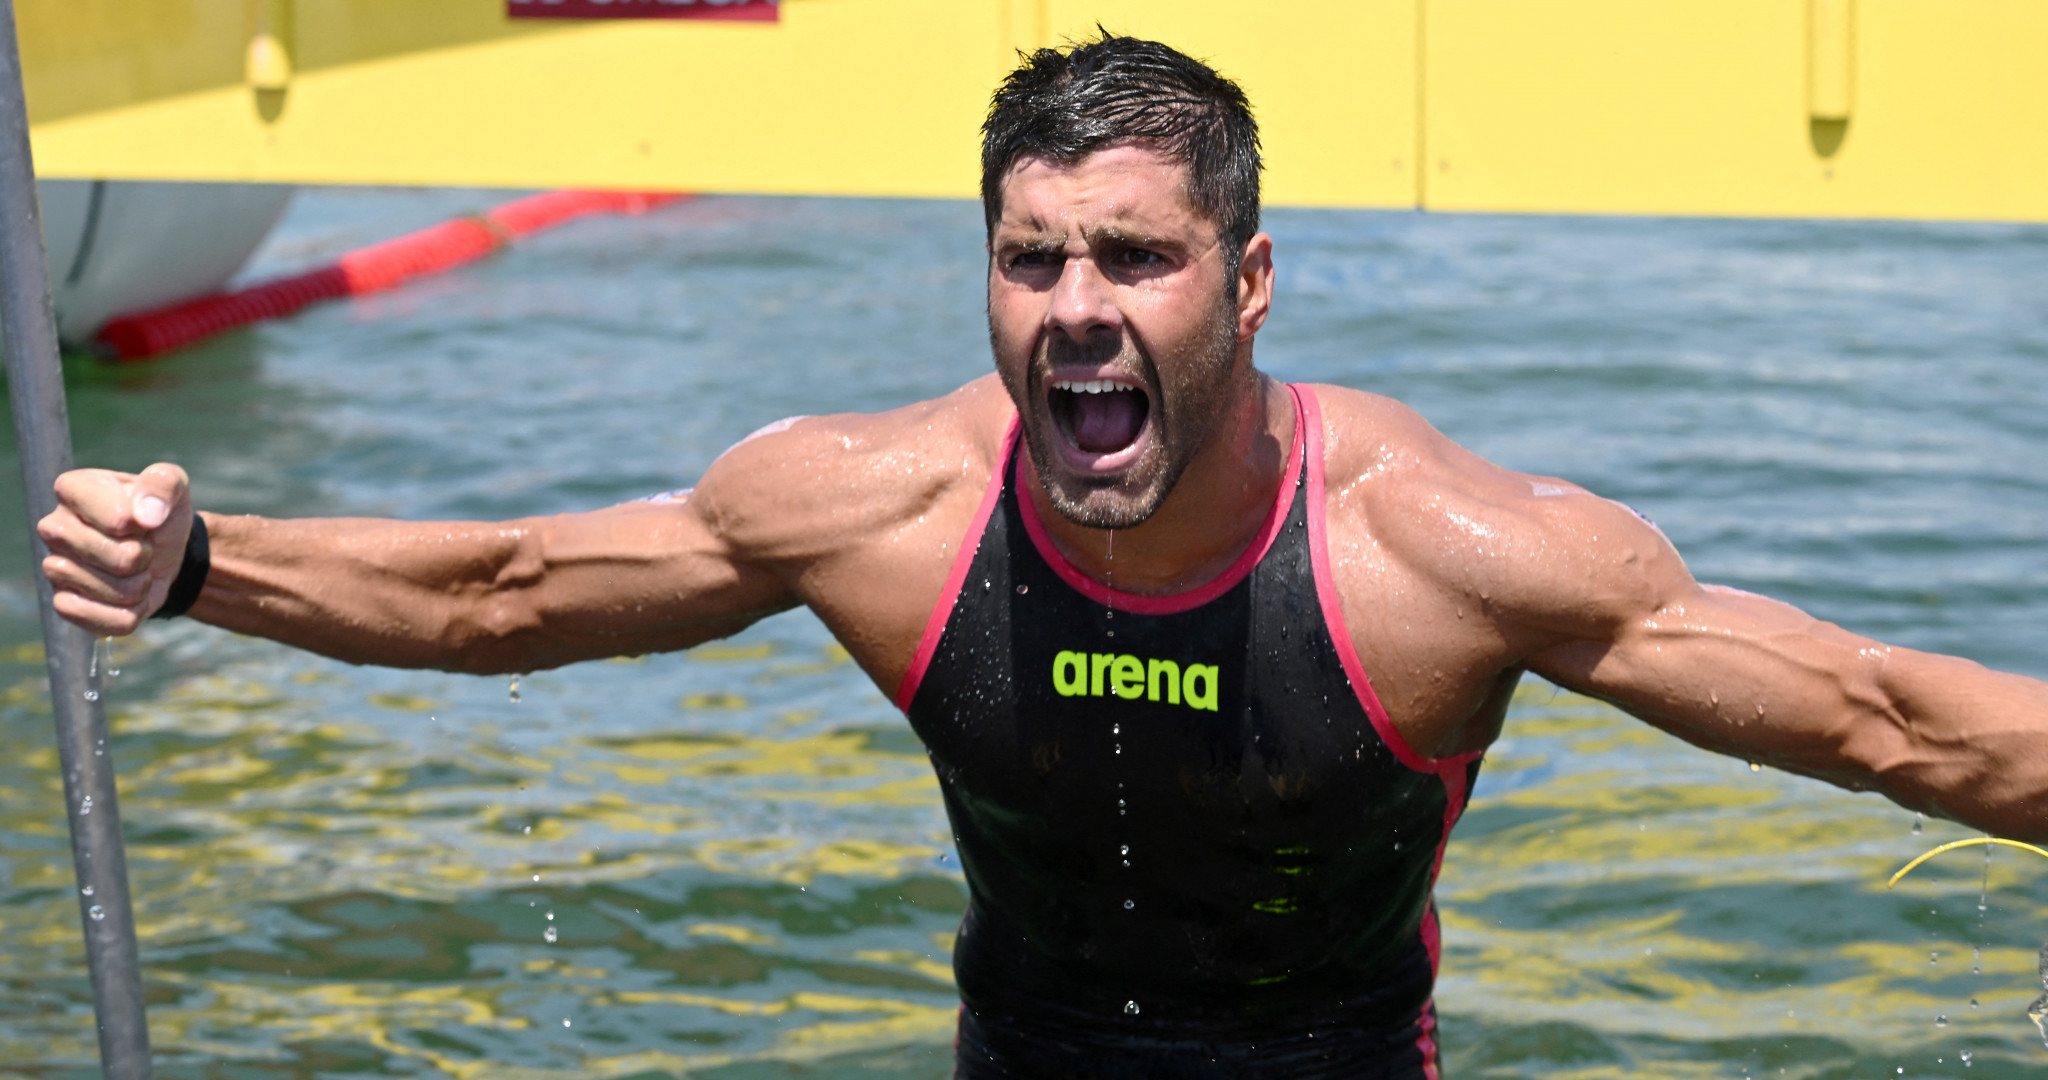 Italy's Dario Verani came out on top in the men's 25km open water race ©Getty Images